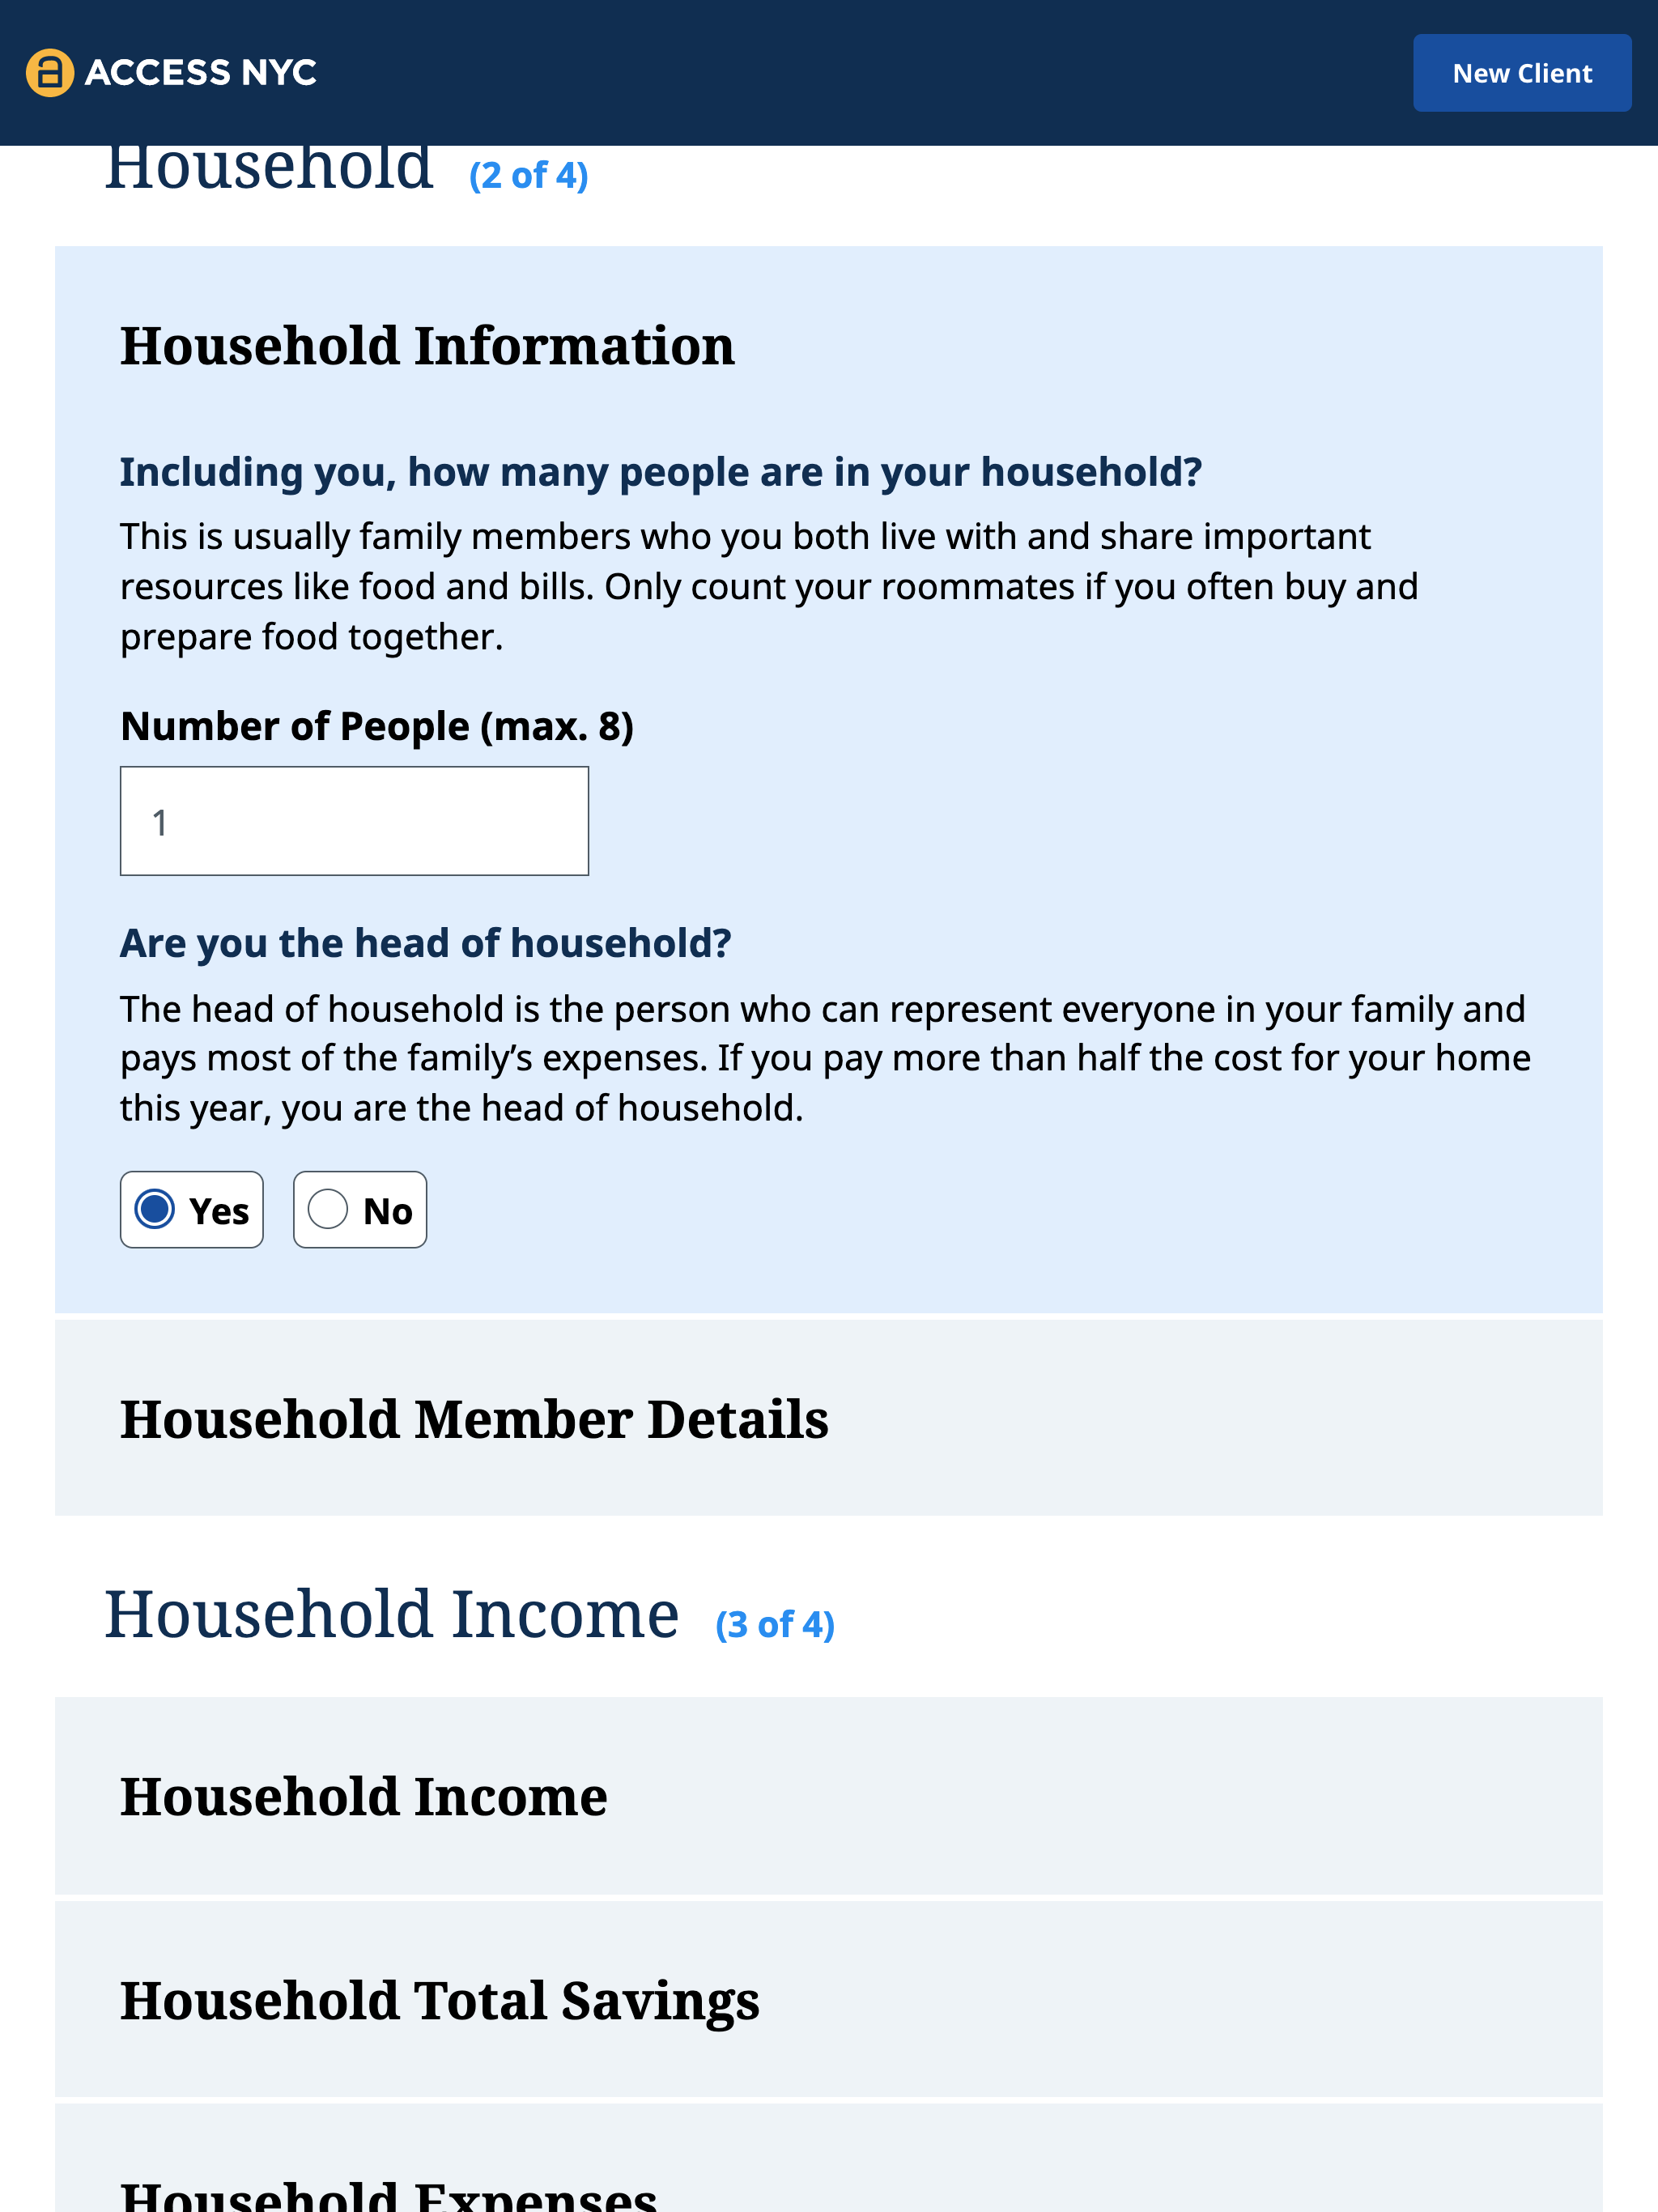 Screenshot of the household information section